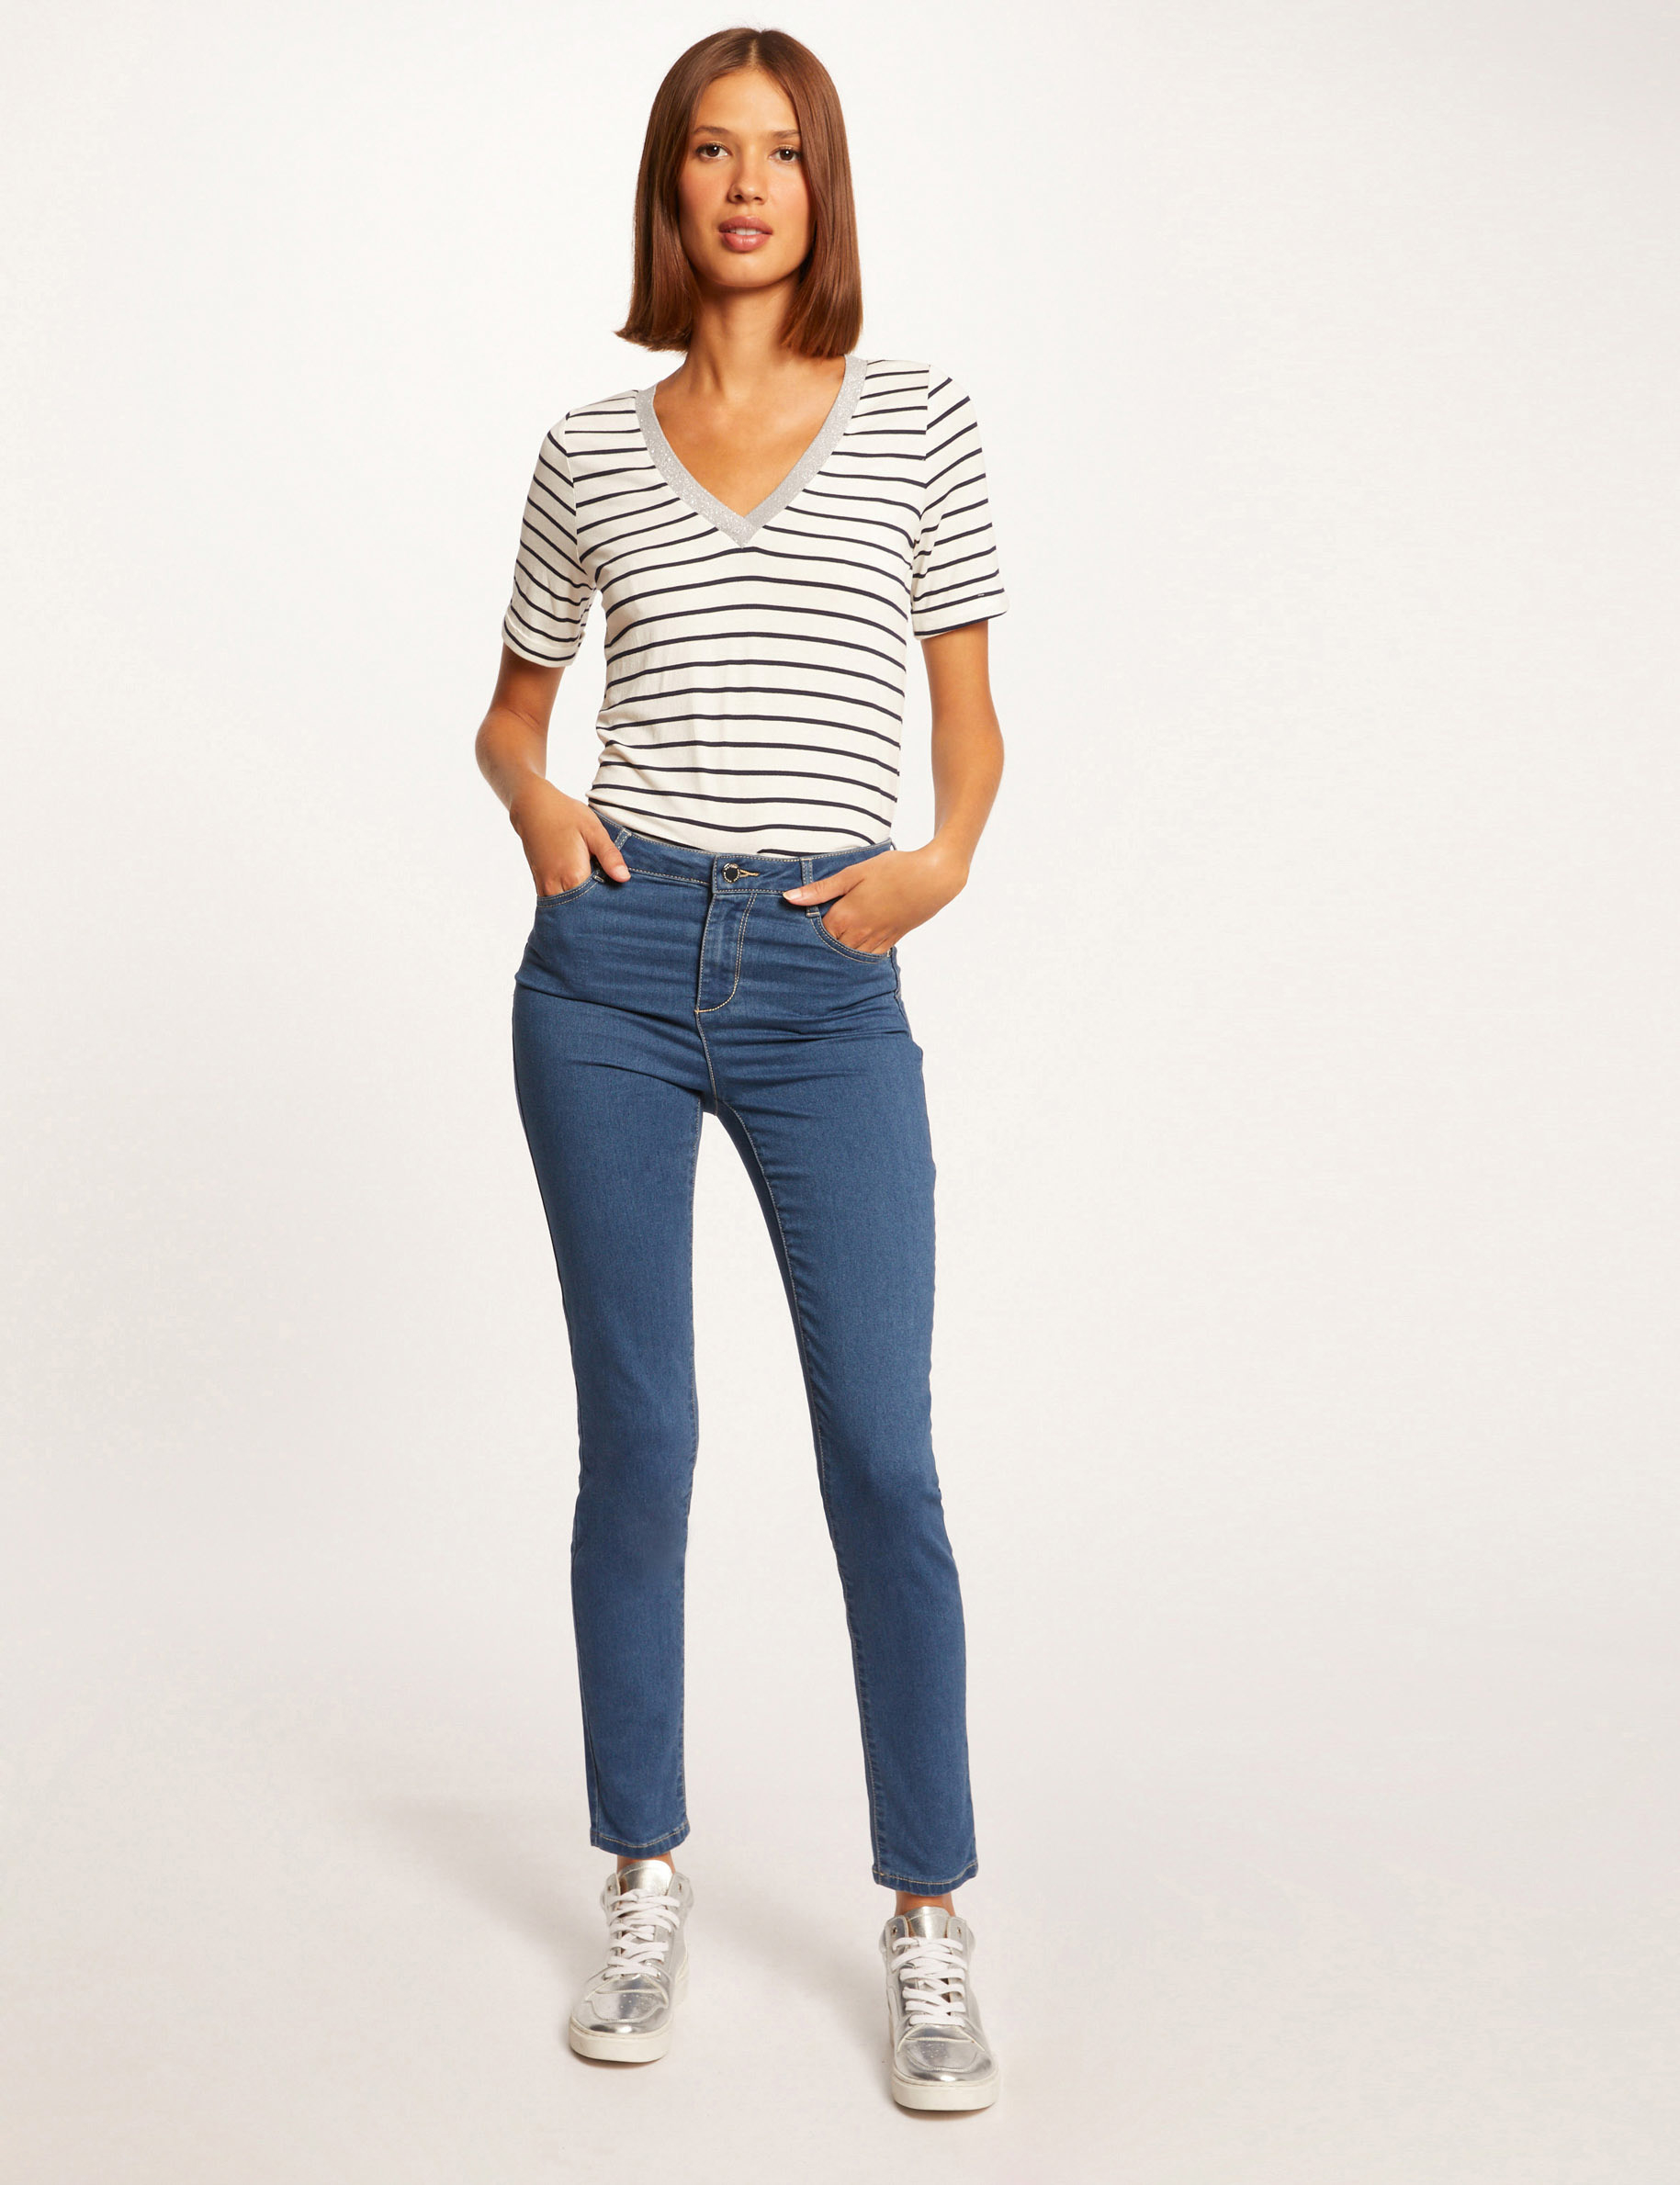 Short-sleeved t-shirt with stripes multico ladies'